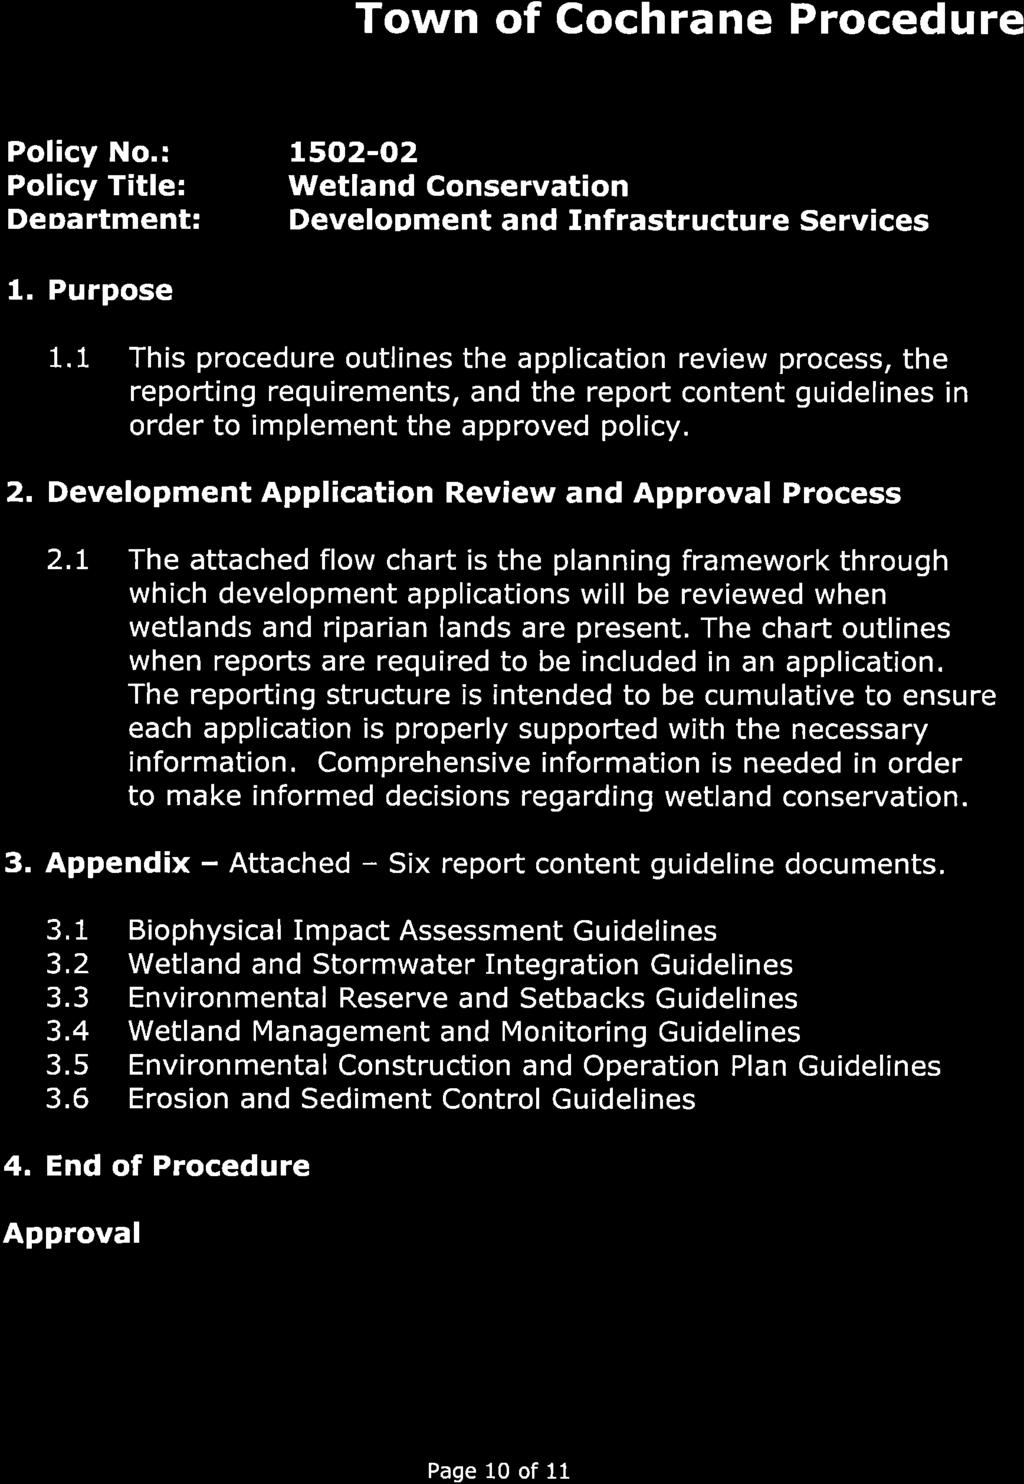 cocnrane HqW lhc W BI IE NOW Policy No.: Policy Title: Deoartment: Town of Cochrane Procedure L5fJ2-O2 Wetland Conservation Develooment and fnfrastructure Services 1. Purpose 1.